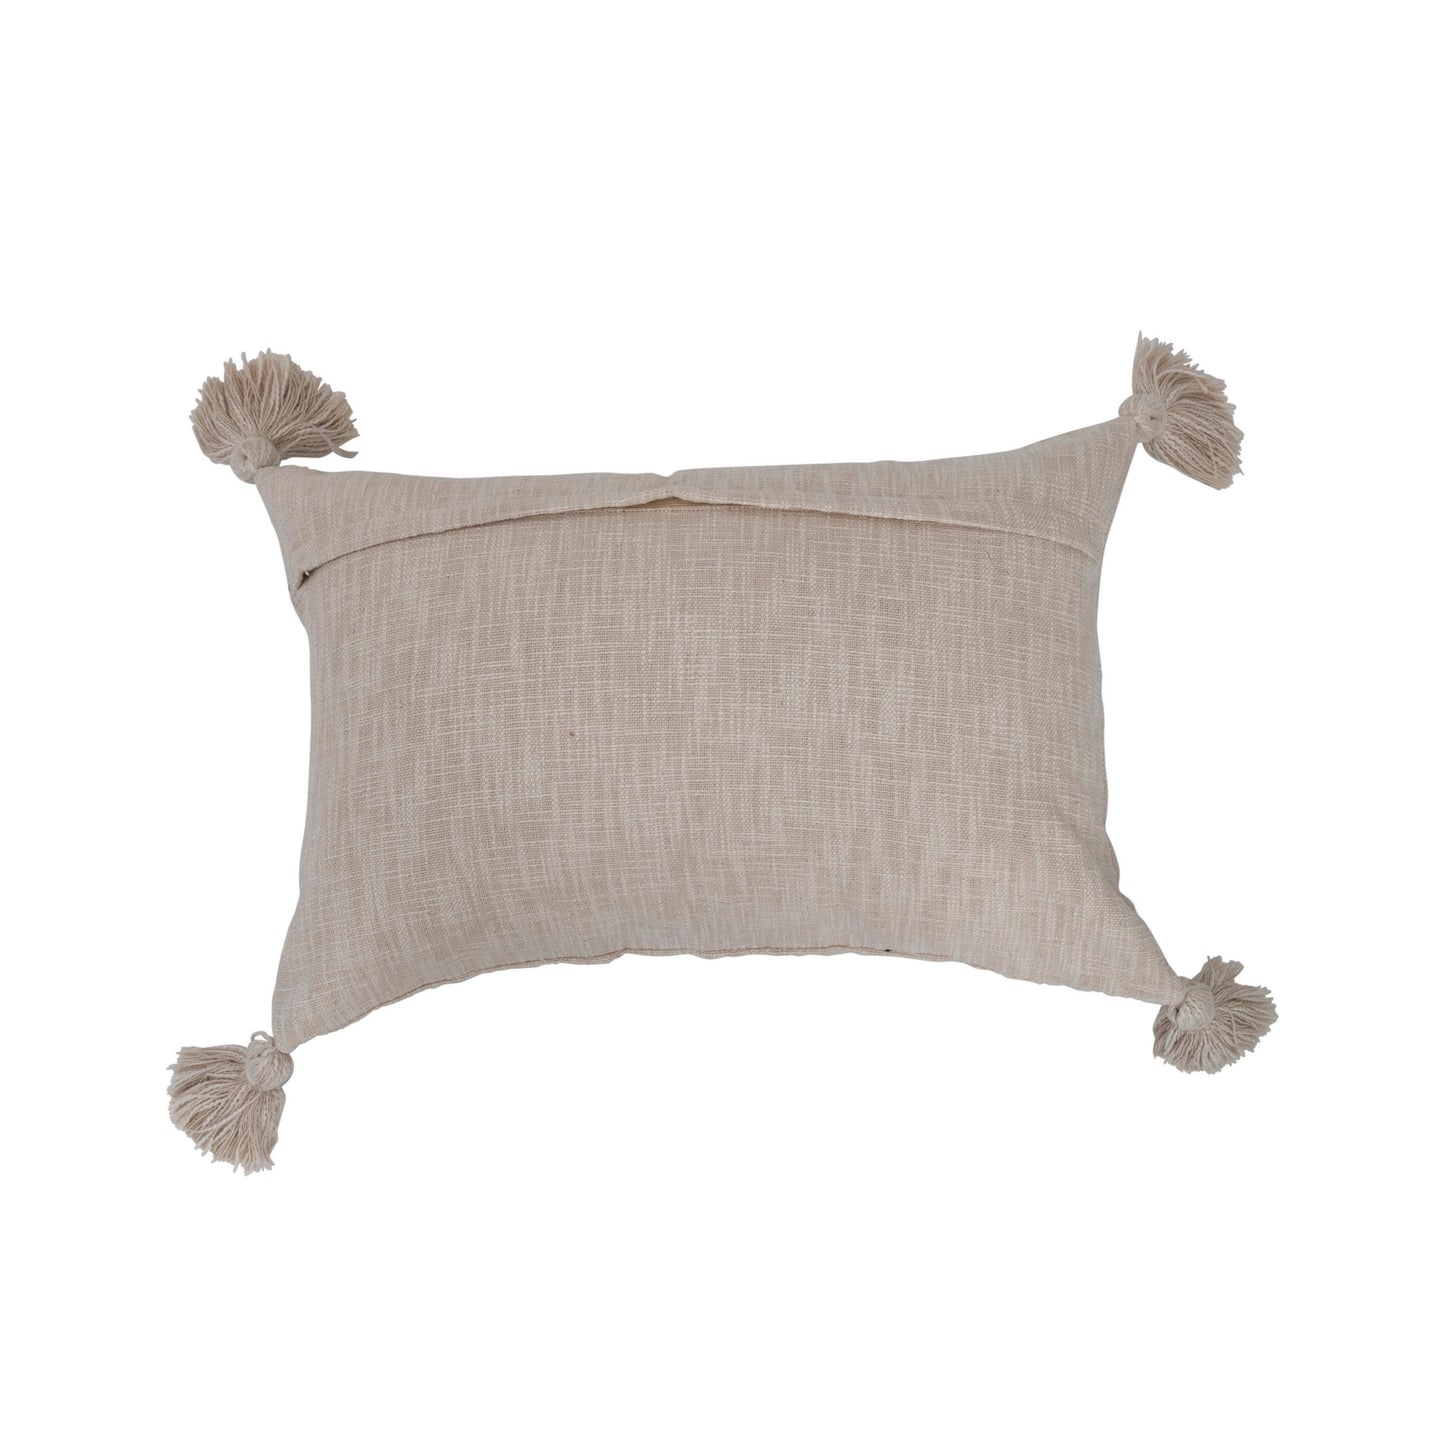 Woven Cotton Slub Lumbar Pillow with Applique, Tassels, and Fringe